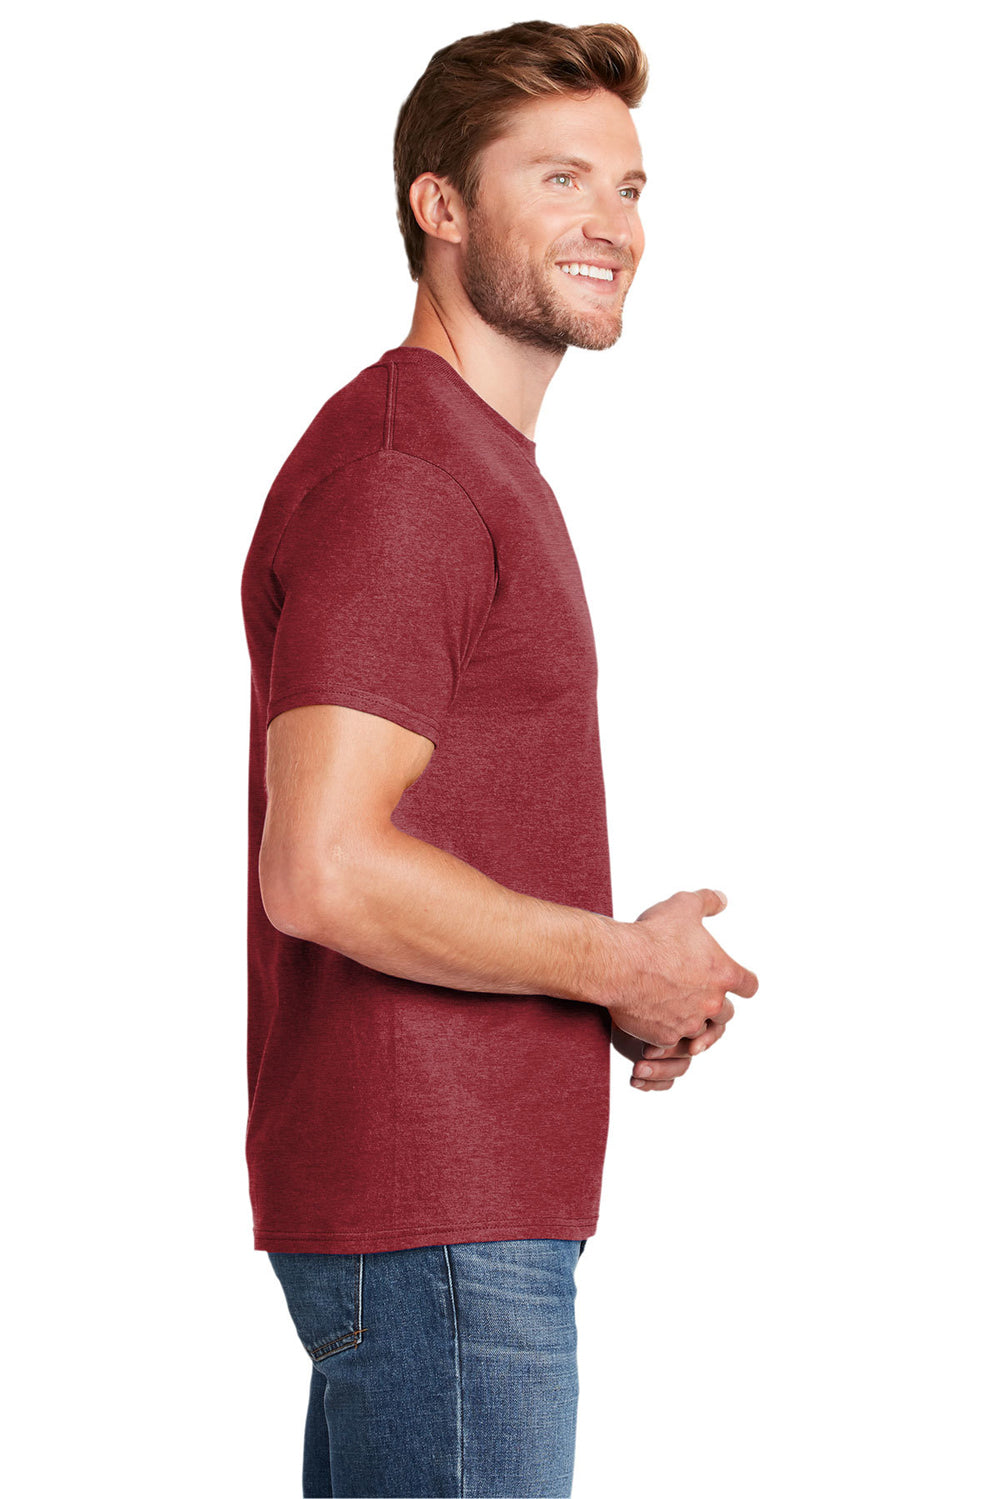 Hanes 5180/518T Mens Beefy-T Short Sleeve Crewneck T-Shirt Heather Red Side